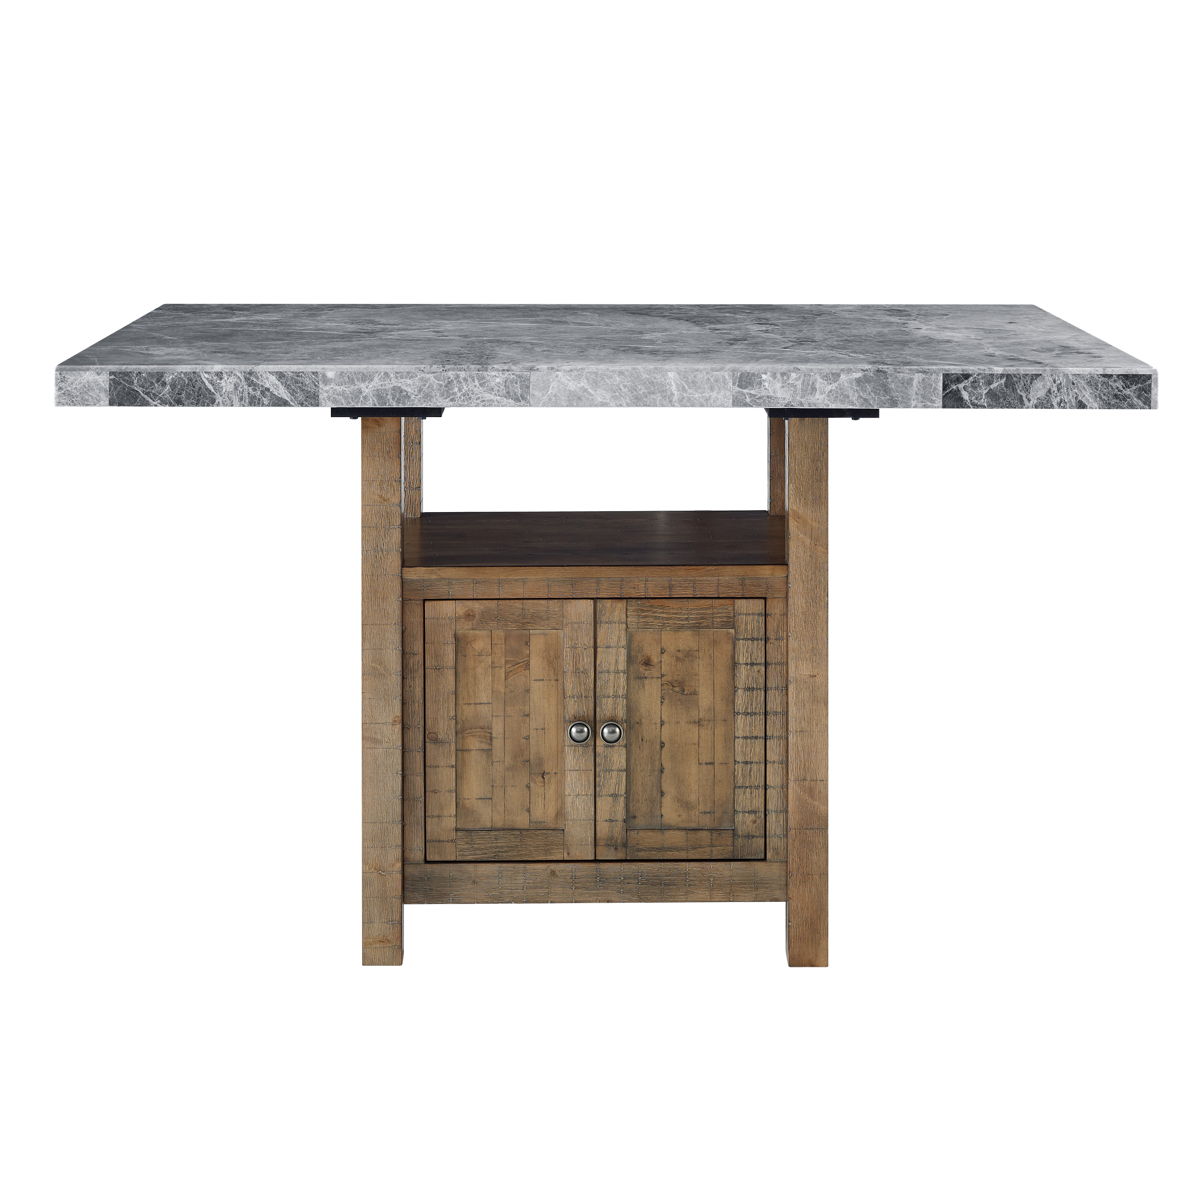 Grayson - Counter Dining Set - Distressed Wood Base